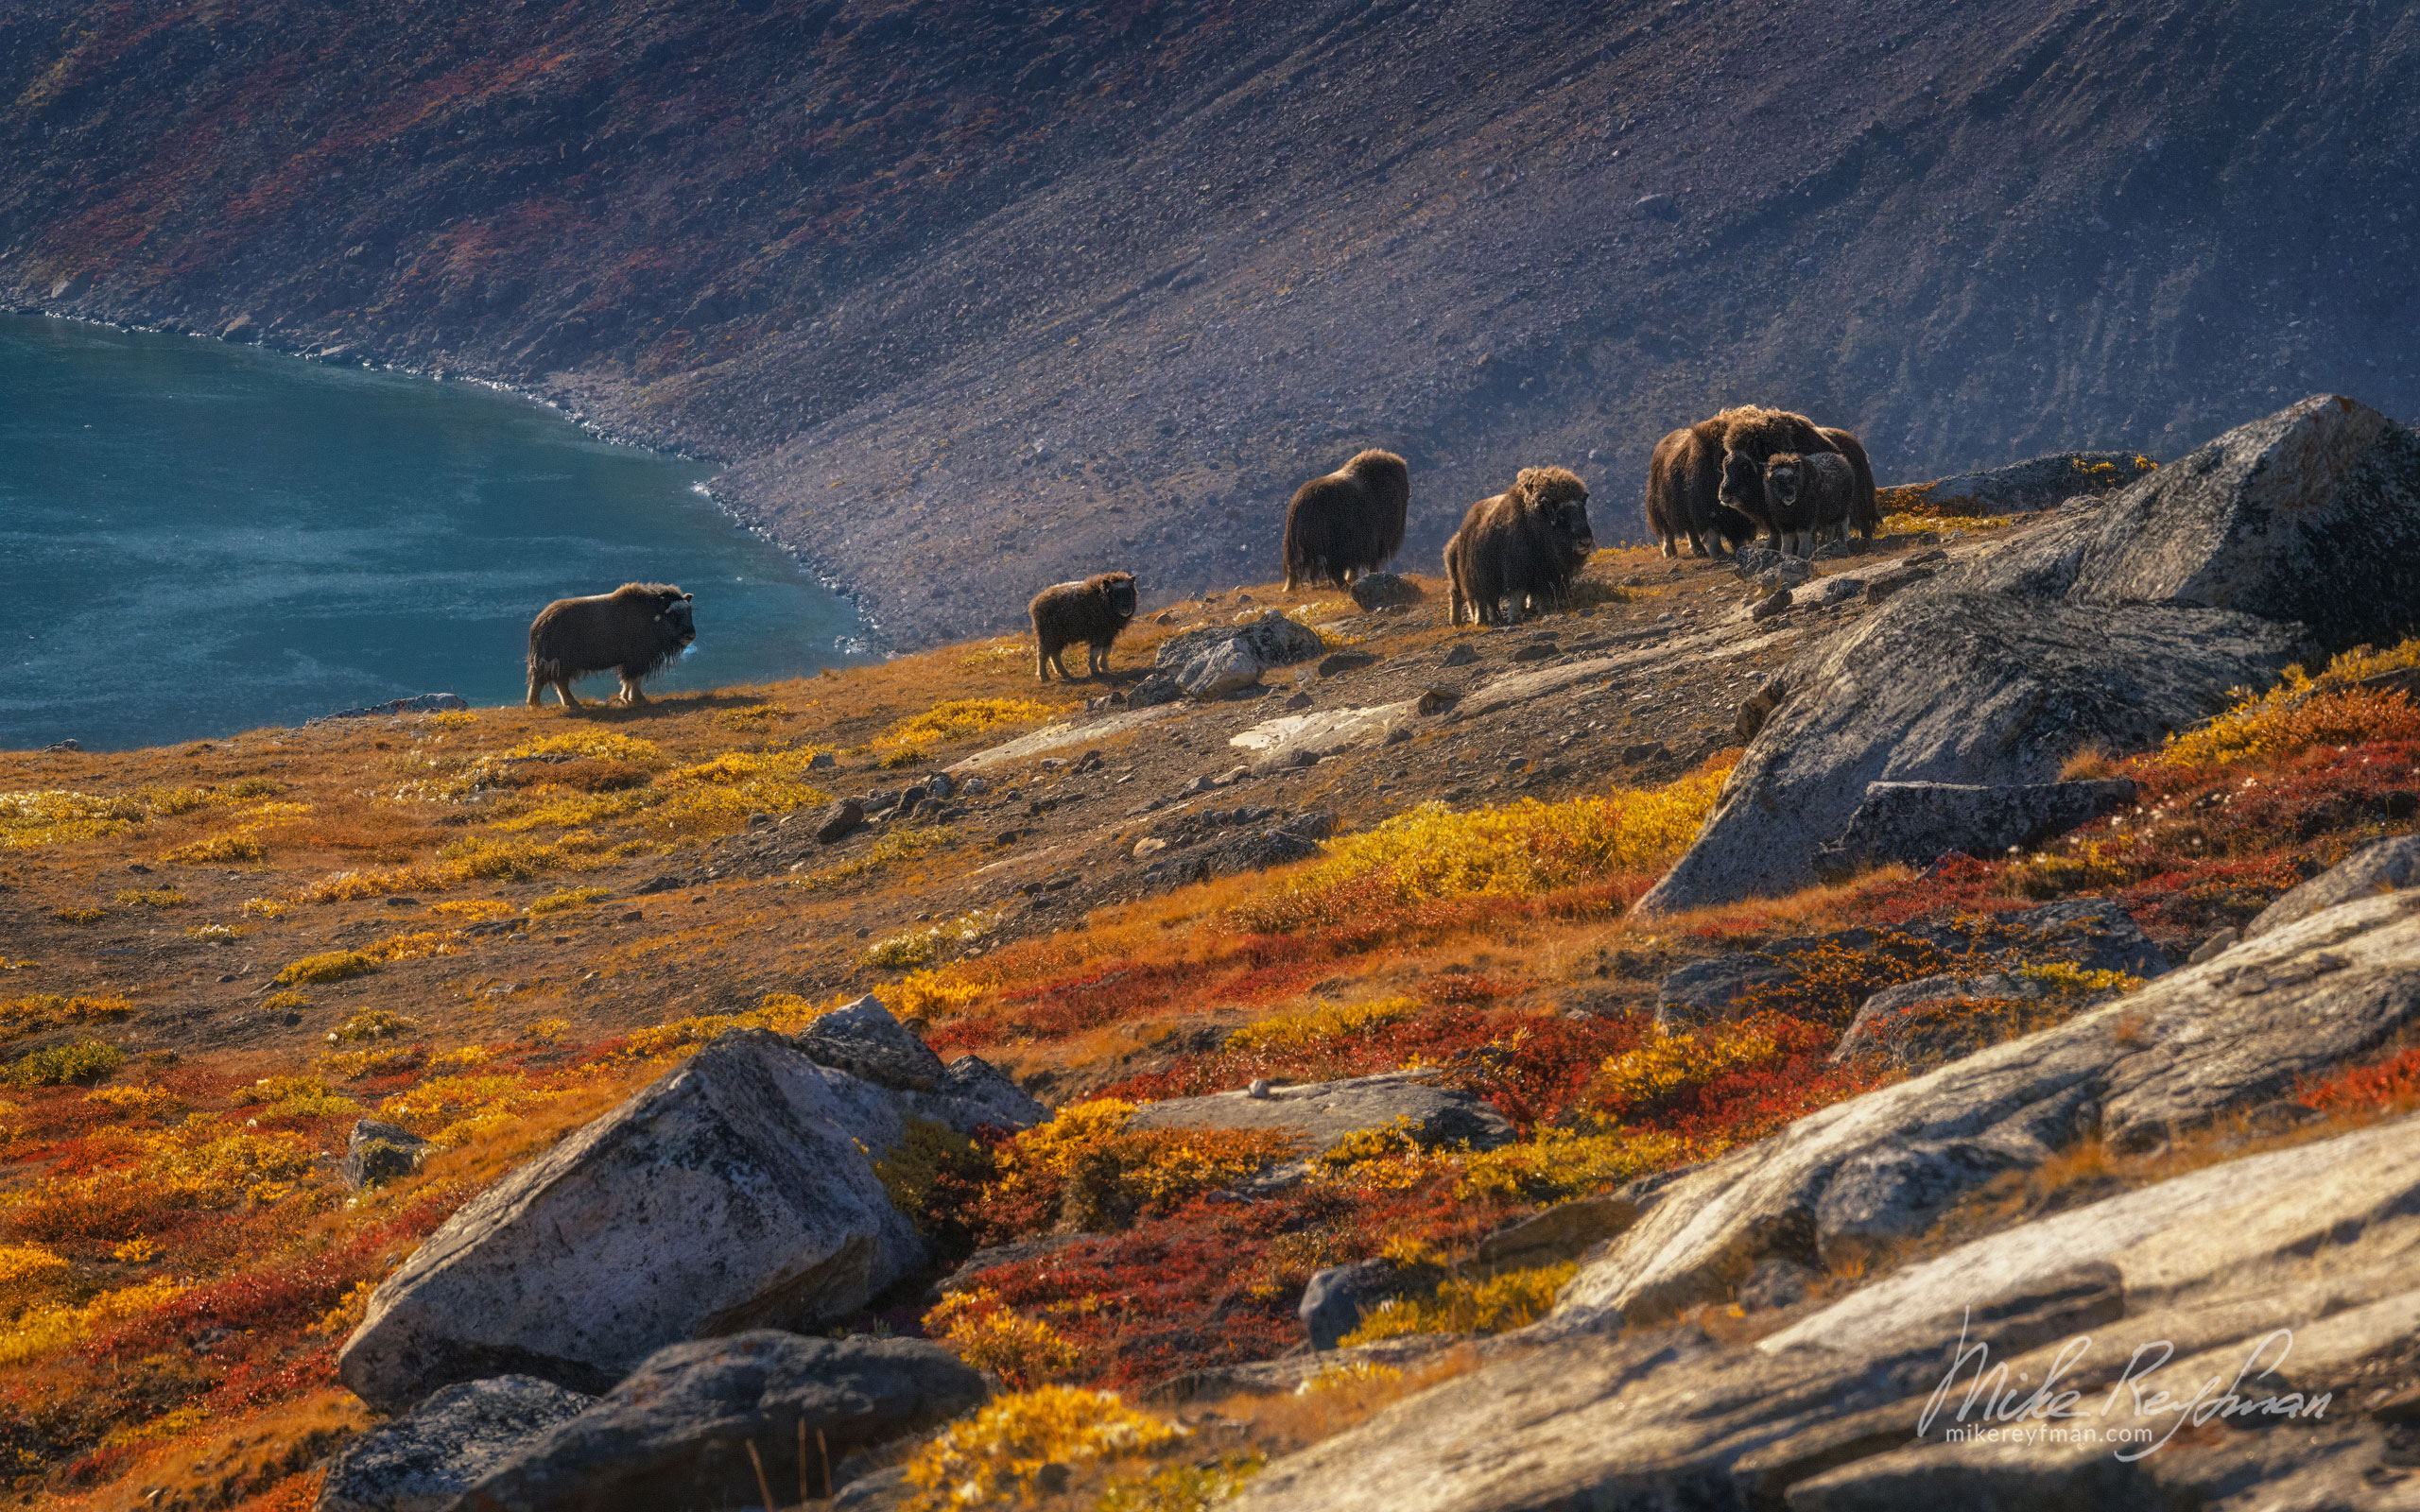 Muskoxen in colorful autumn tundra. Scoresby Sund. Greenland. 046-GR-SC_50B6594 - The Scoresby Sund fjord system and the settlement of Ittoqqortoormiit. East Greenland. - Mike Reyfman Photography